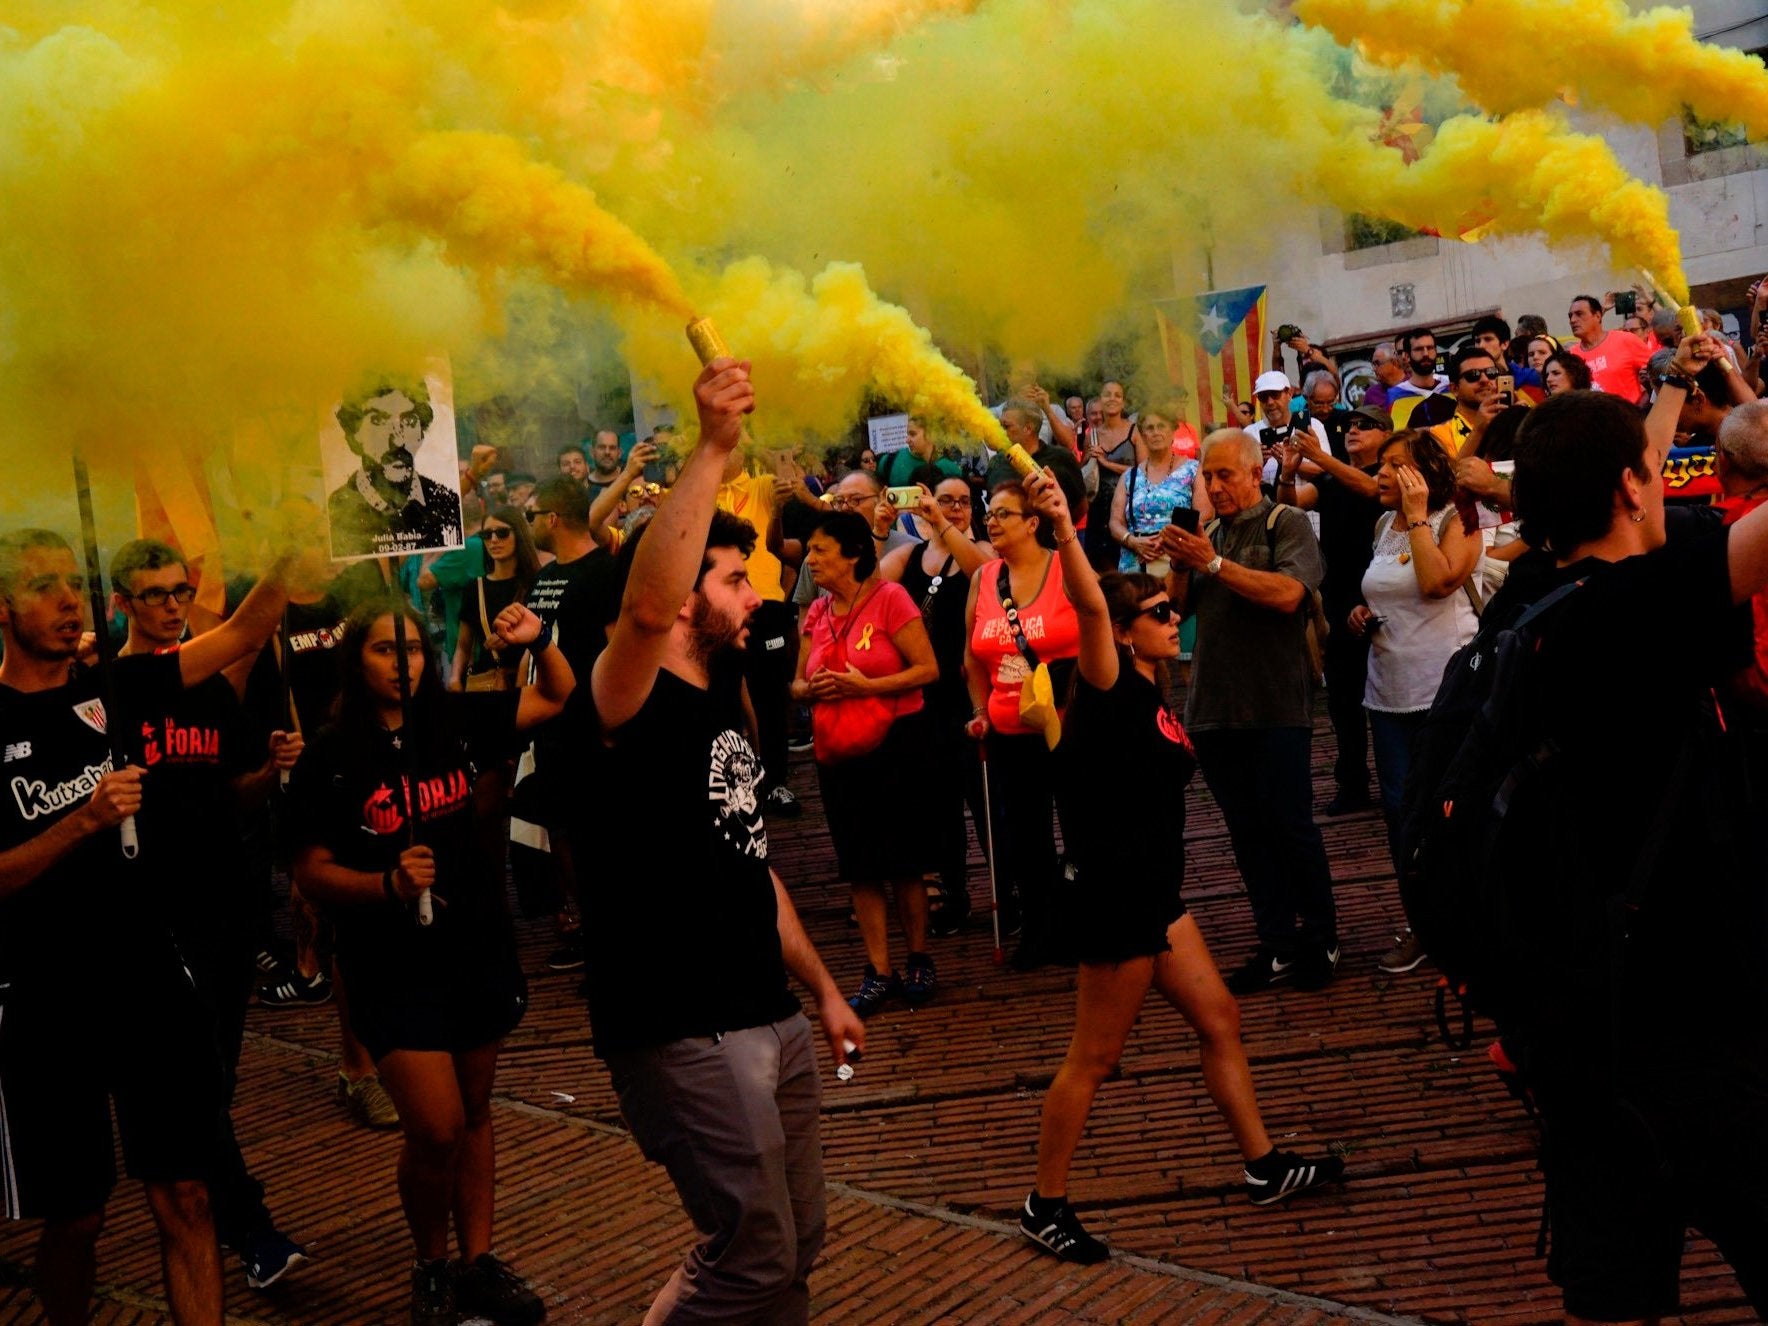 Independence demonstrators, some of them holding flares, march during the Catalan National Day in Barcelona on Tuesday